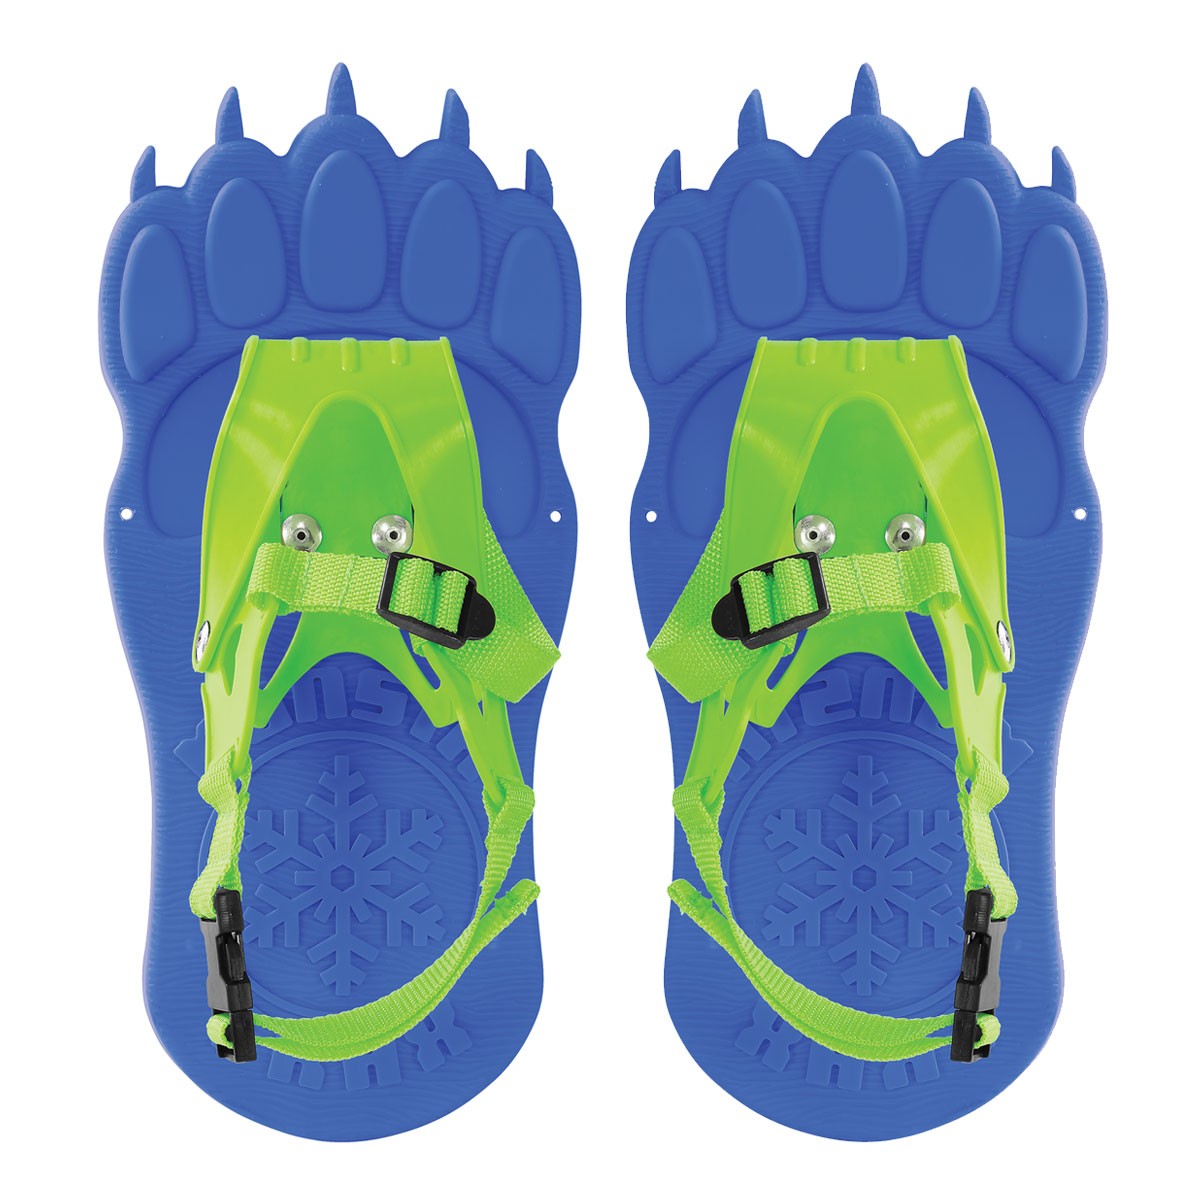 Picture of Airhead AHKS-0001 14.5 x 6.5 in. Monsta Trax Kids Snowshoes